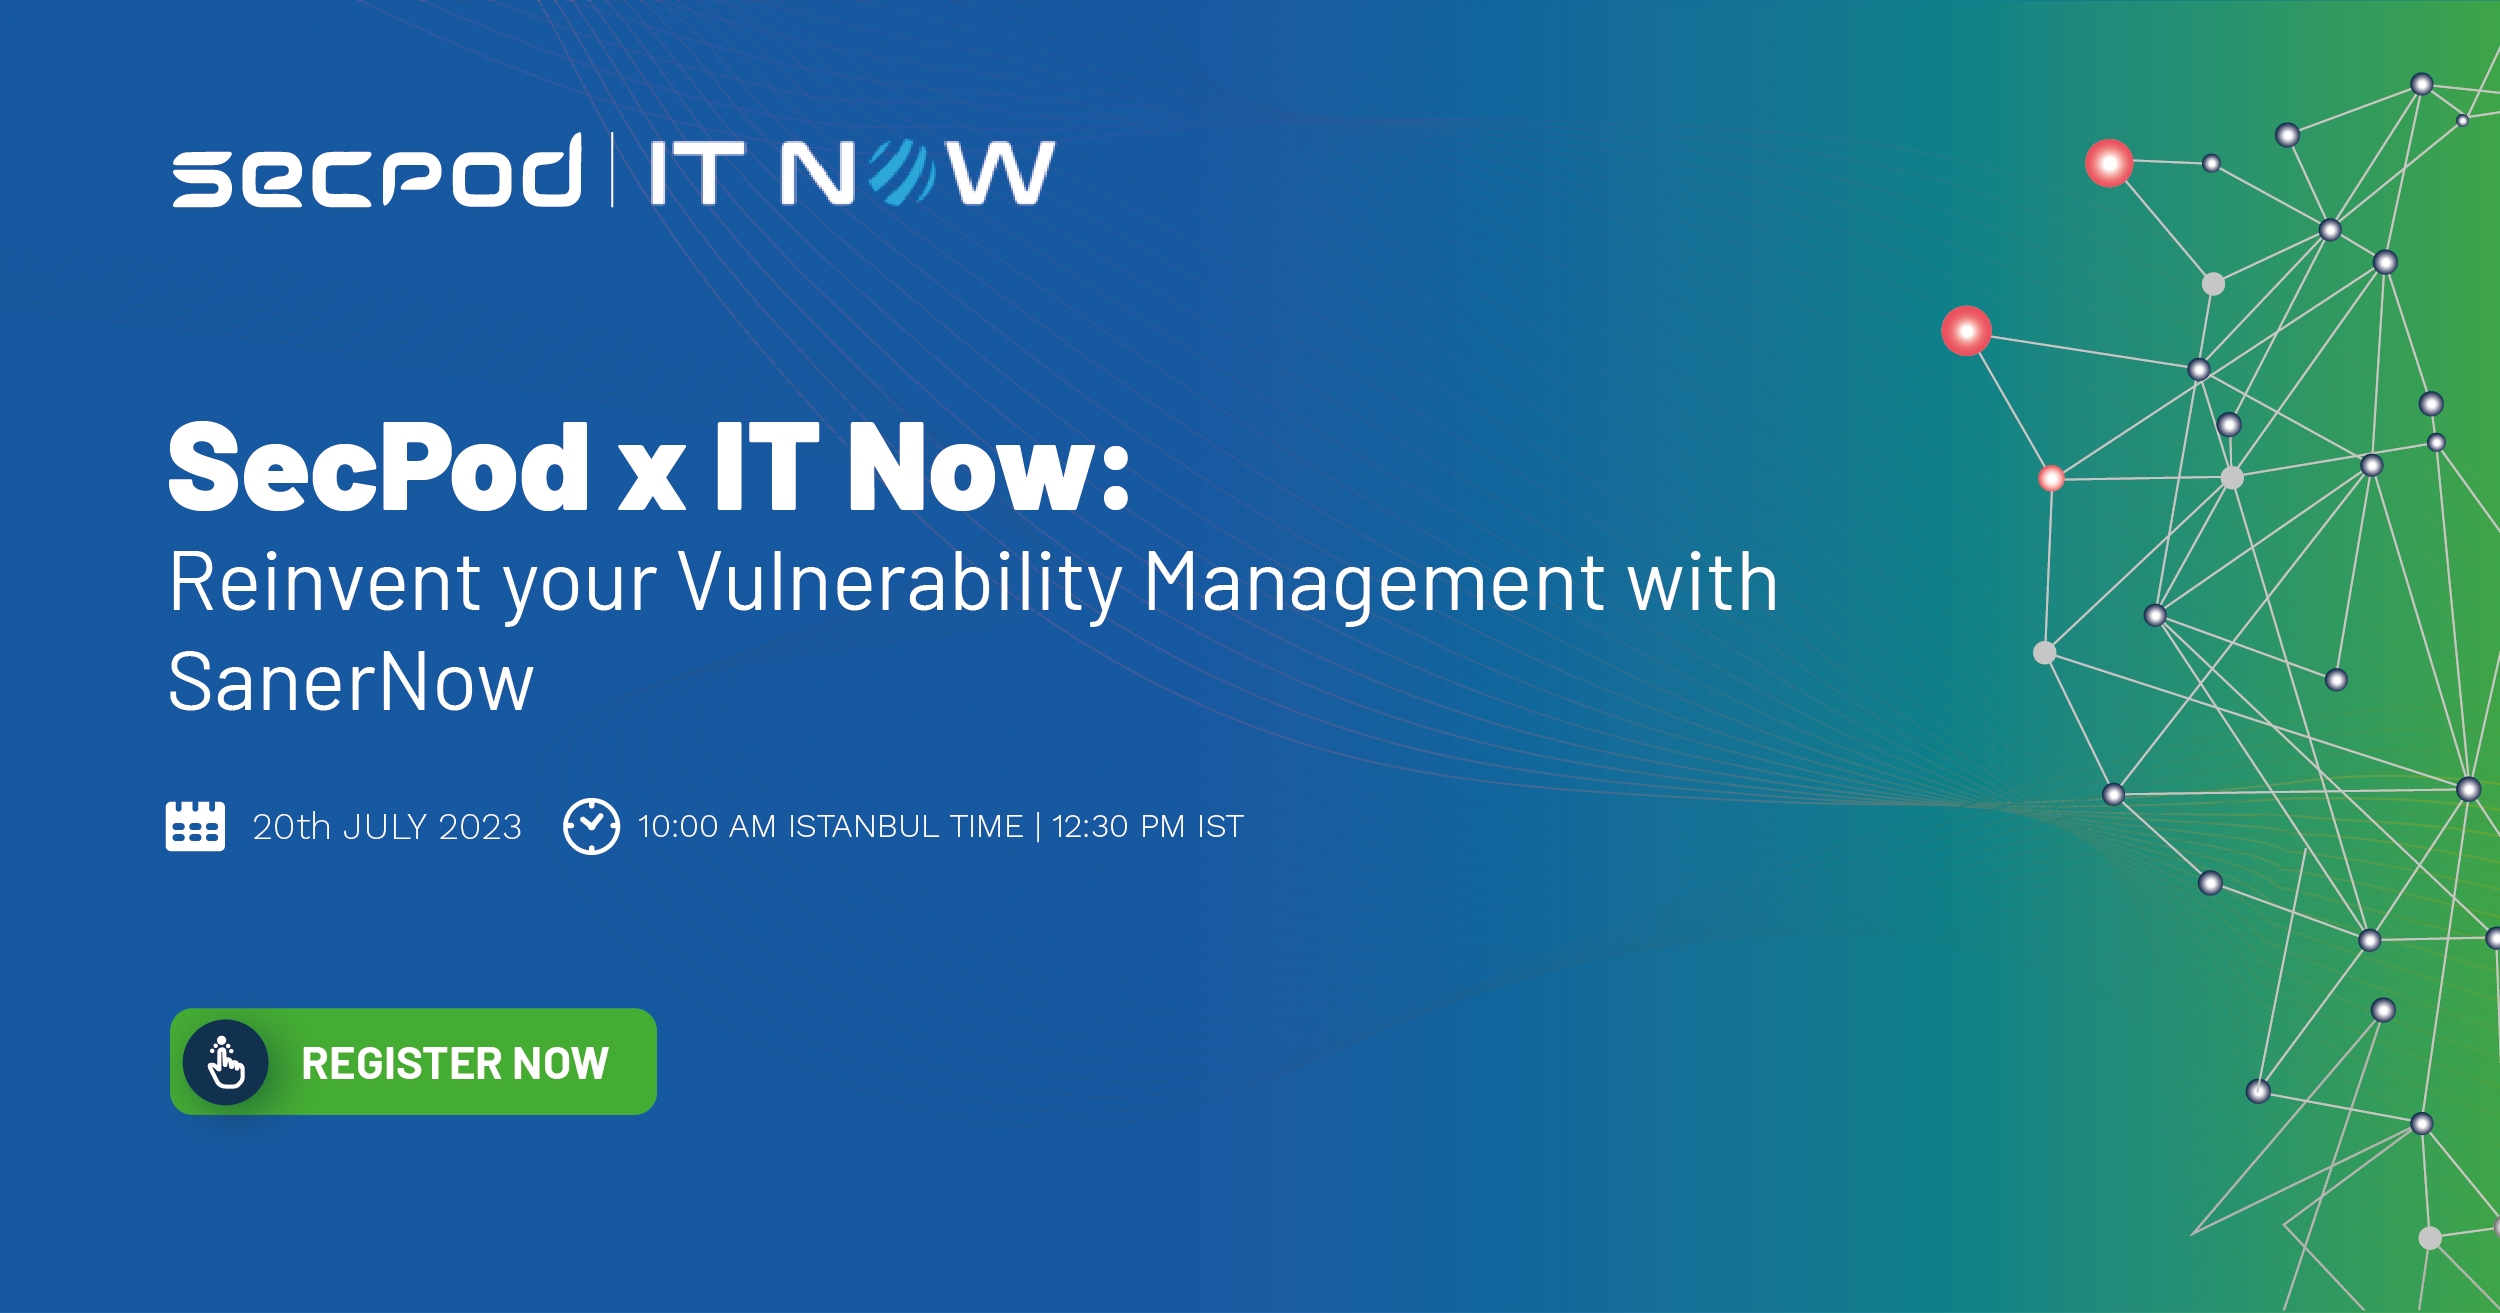 Reinvent your Vulnerability Management with SanerNow Confirmation